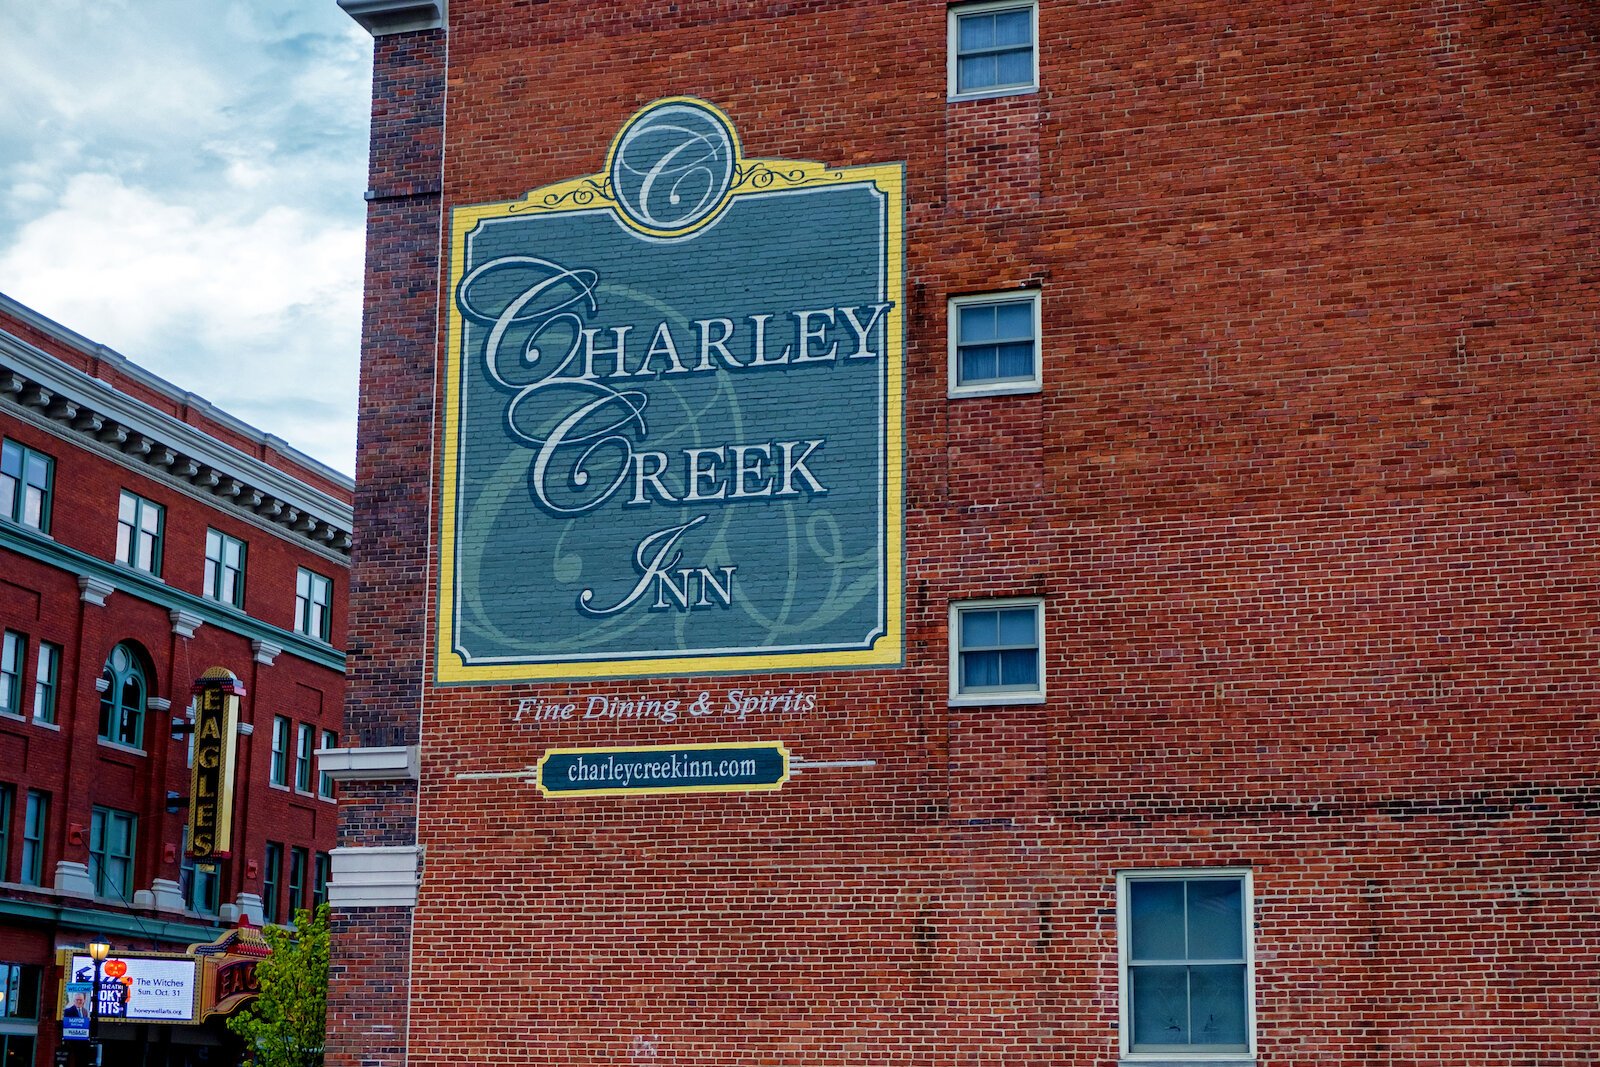 The Charley Creek Inn at 111 W. Market St. in Wabash.